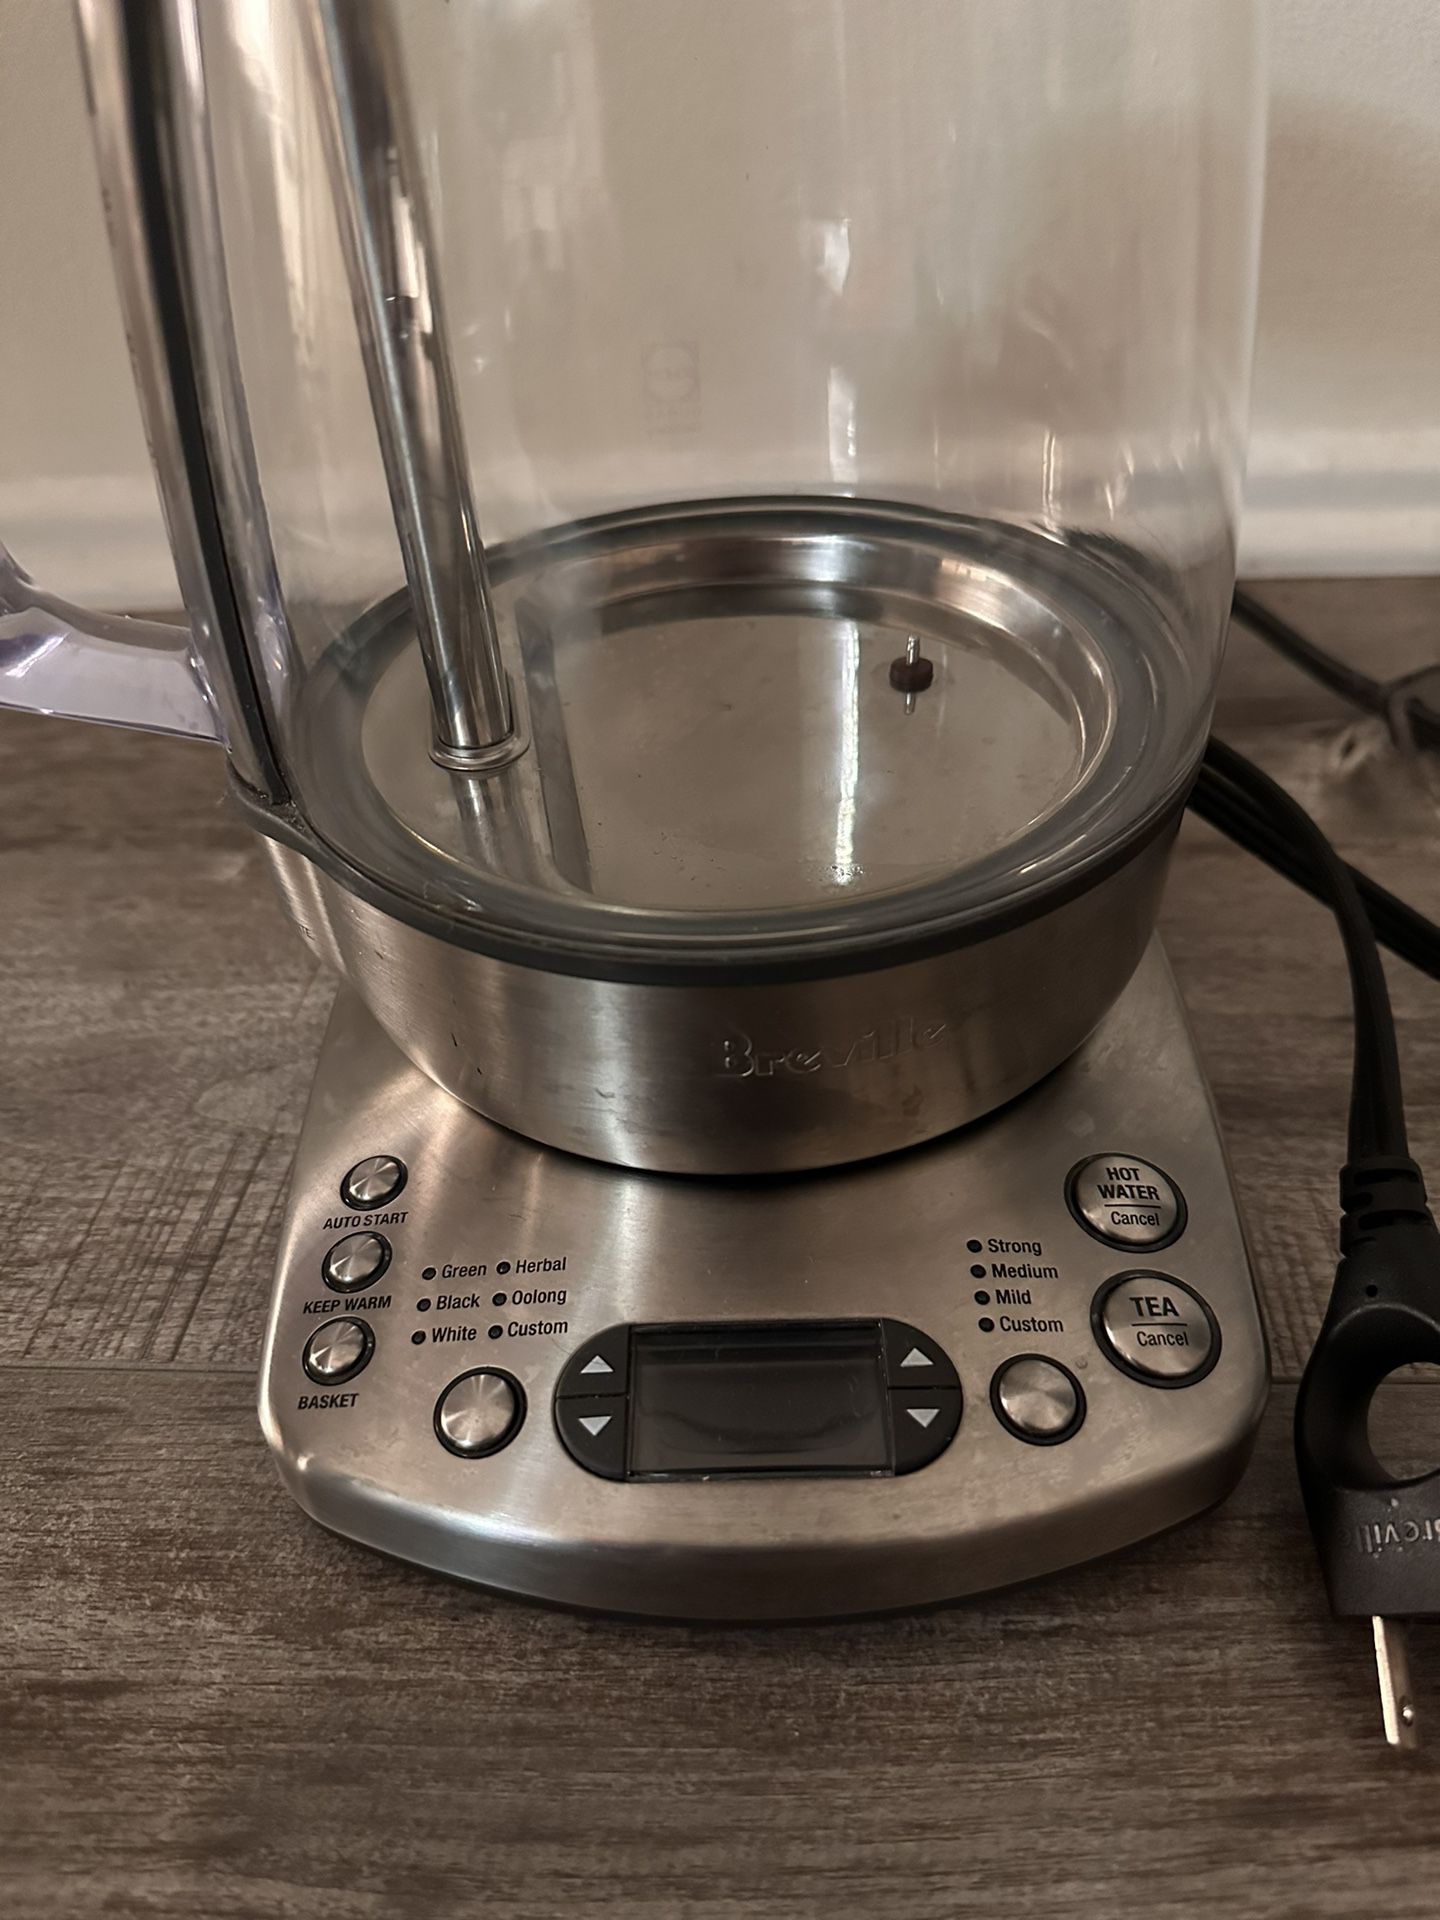 Breville The Temp Select Electric Tea Kettle for Sale in Los Angeles, CA -  OfferUp